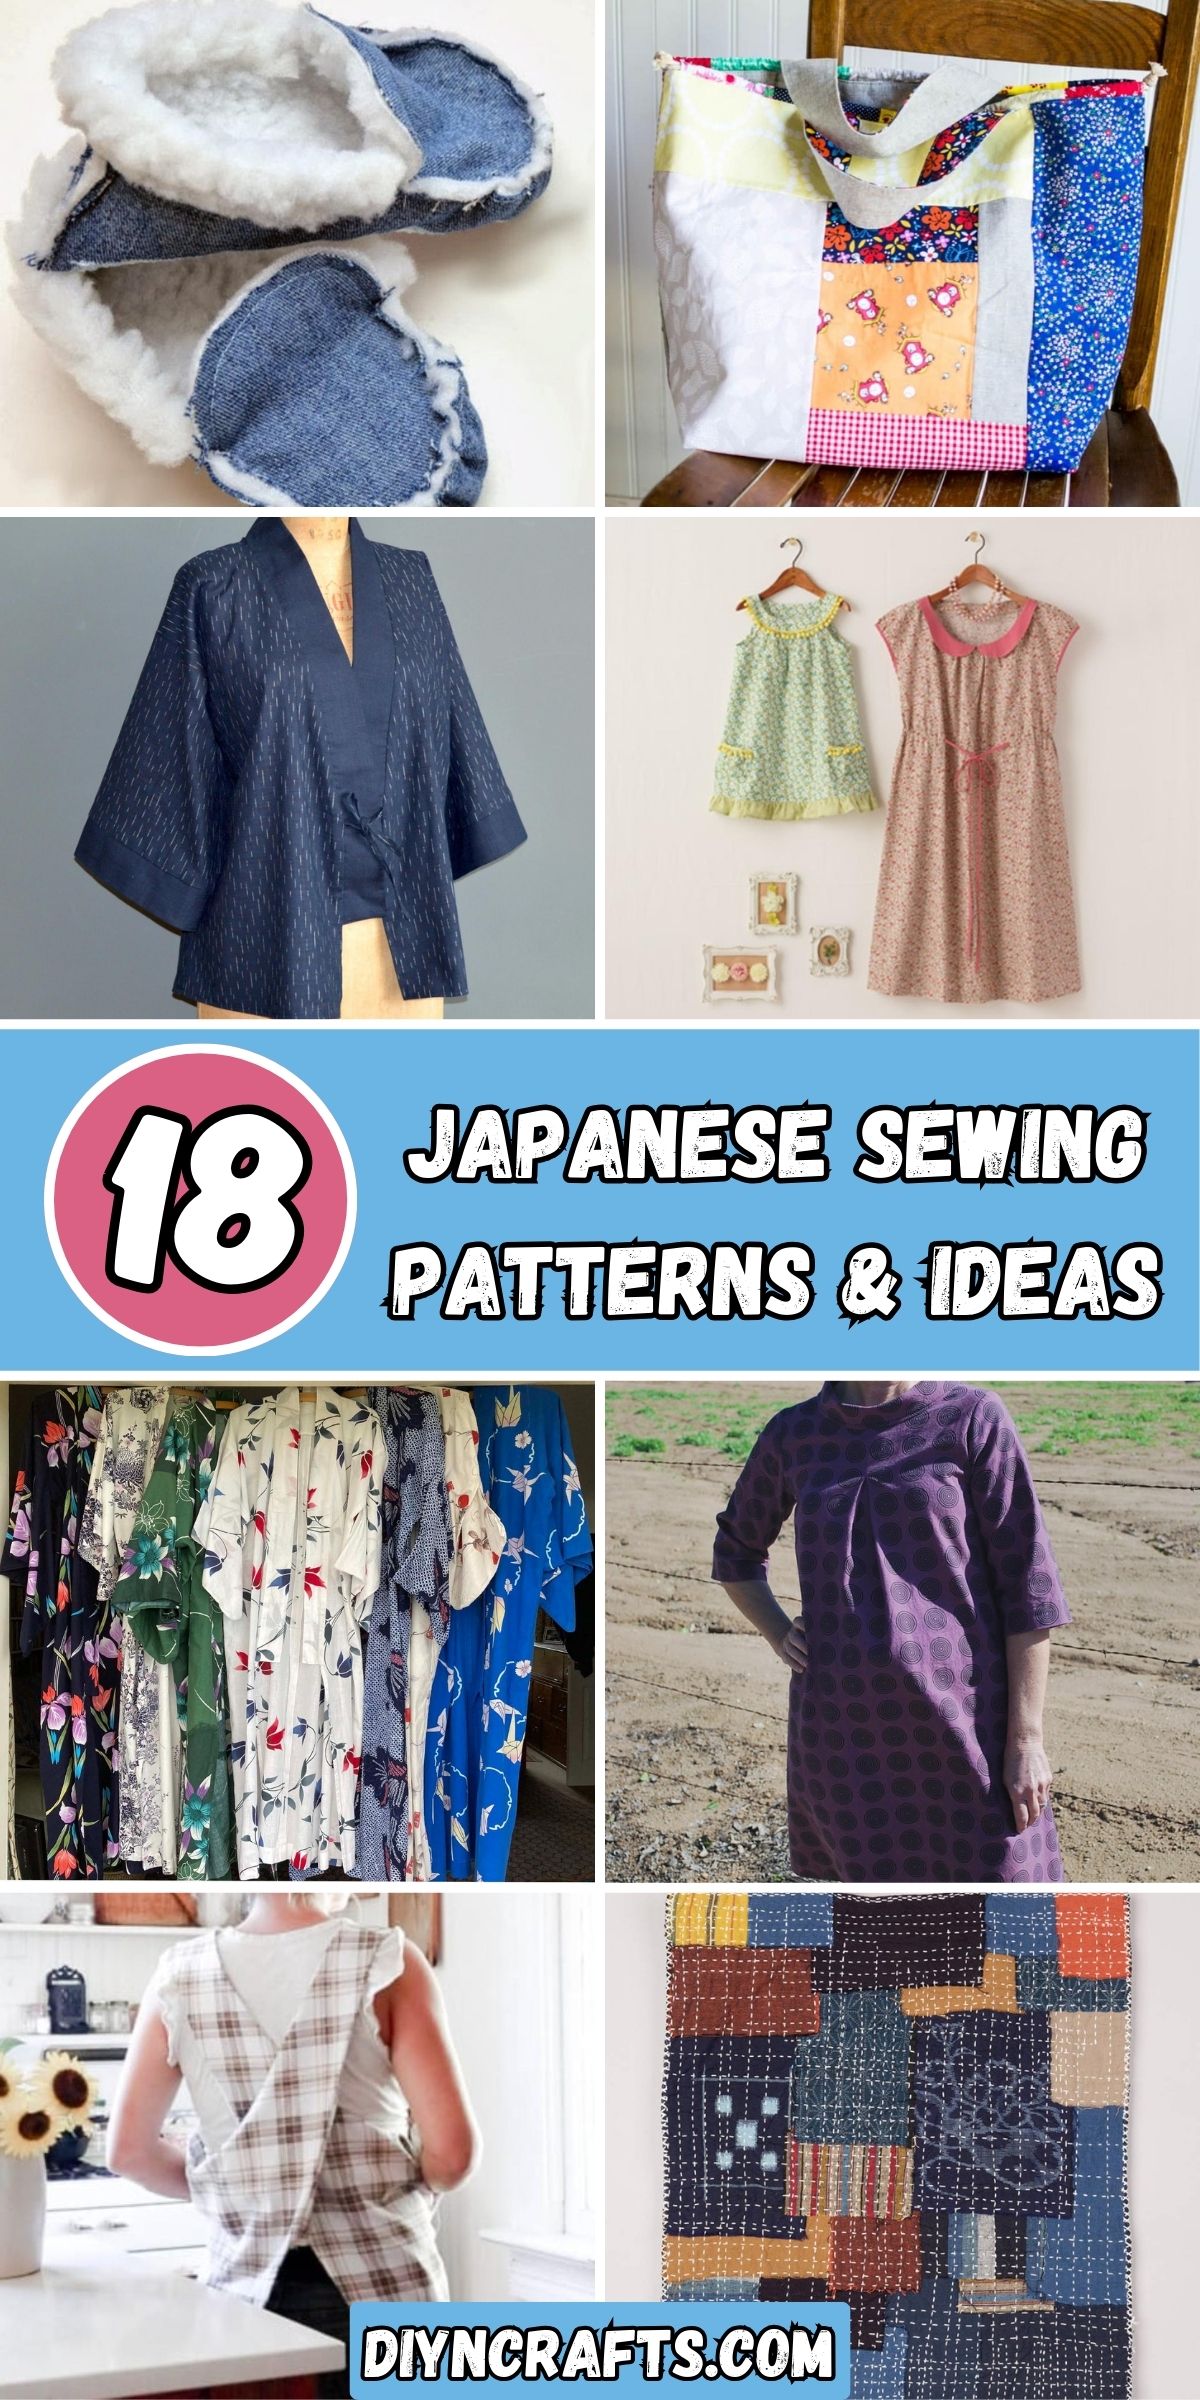 18 Japanese Sewing Patterns & Ideas collage.